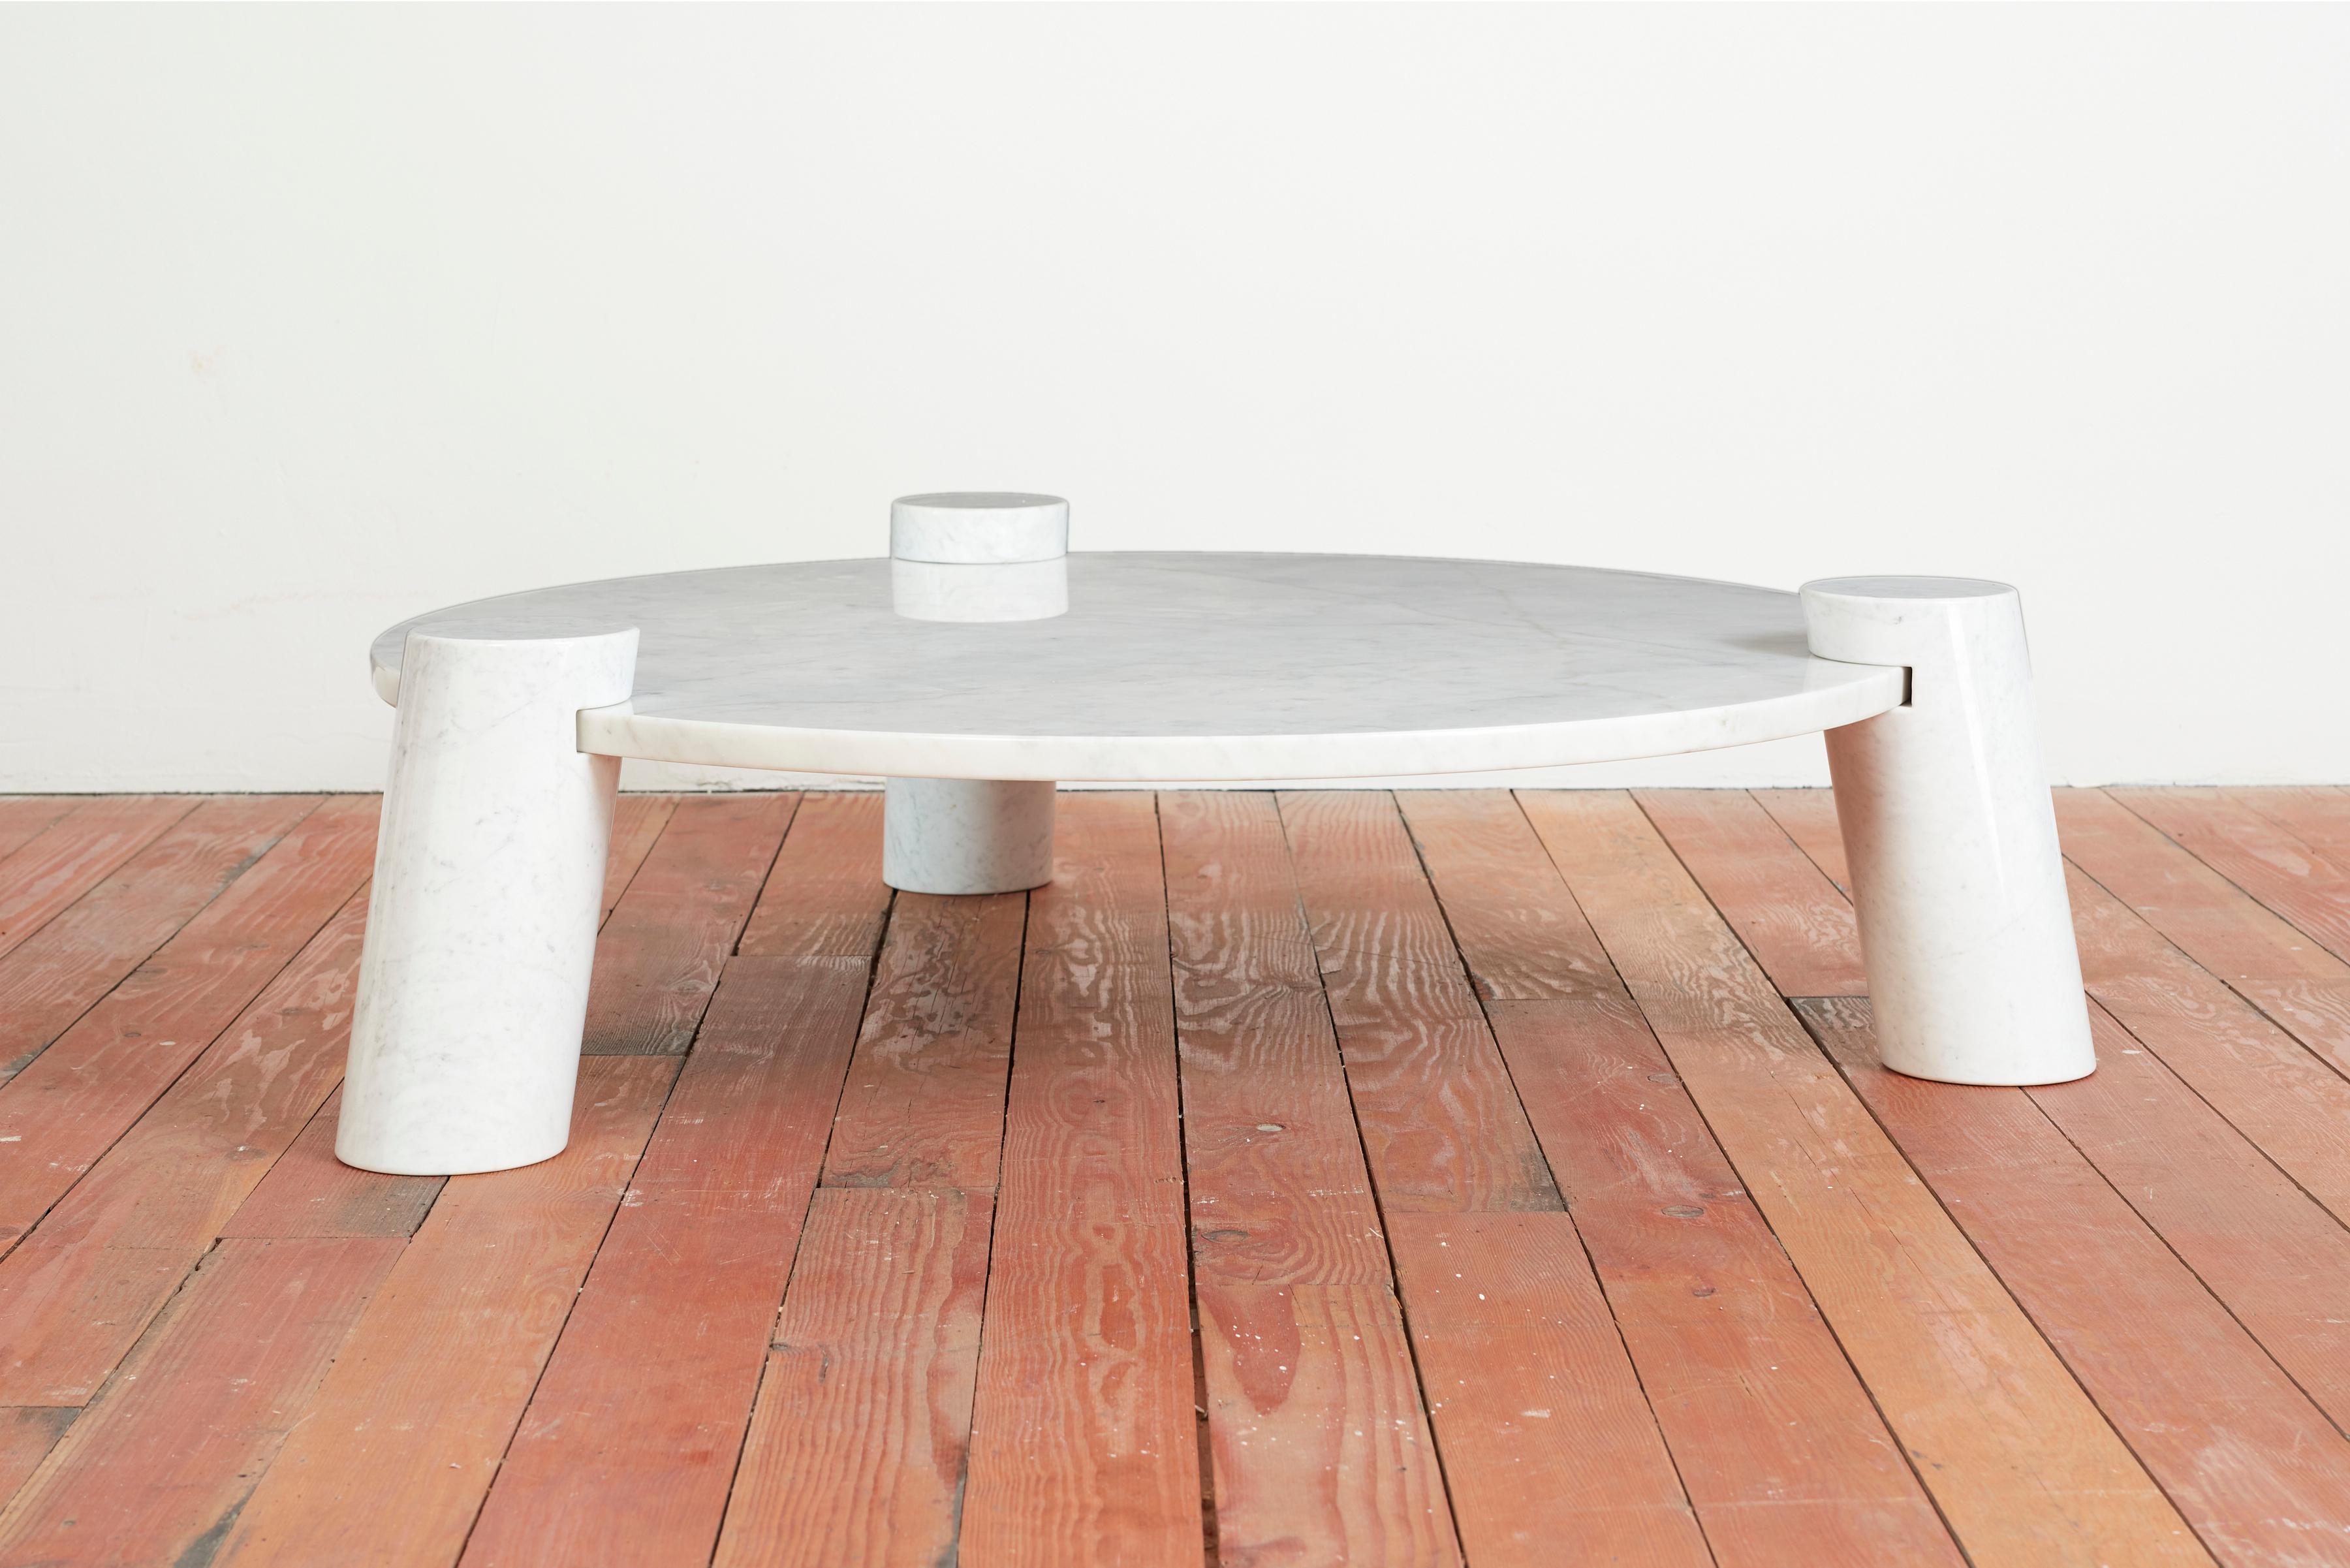 Rare white marble coffee table by Angelo Mangiarotti - Italy 1970s
Skipper manufacture with original label. 

Constructed with three inclined marble legs which recess into the top inside of each of the 3 legs. 

Exquisite piece!